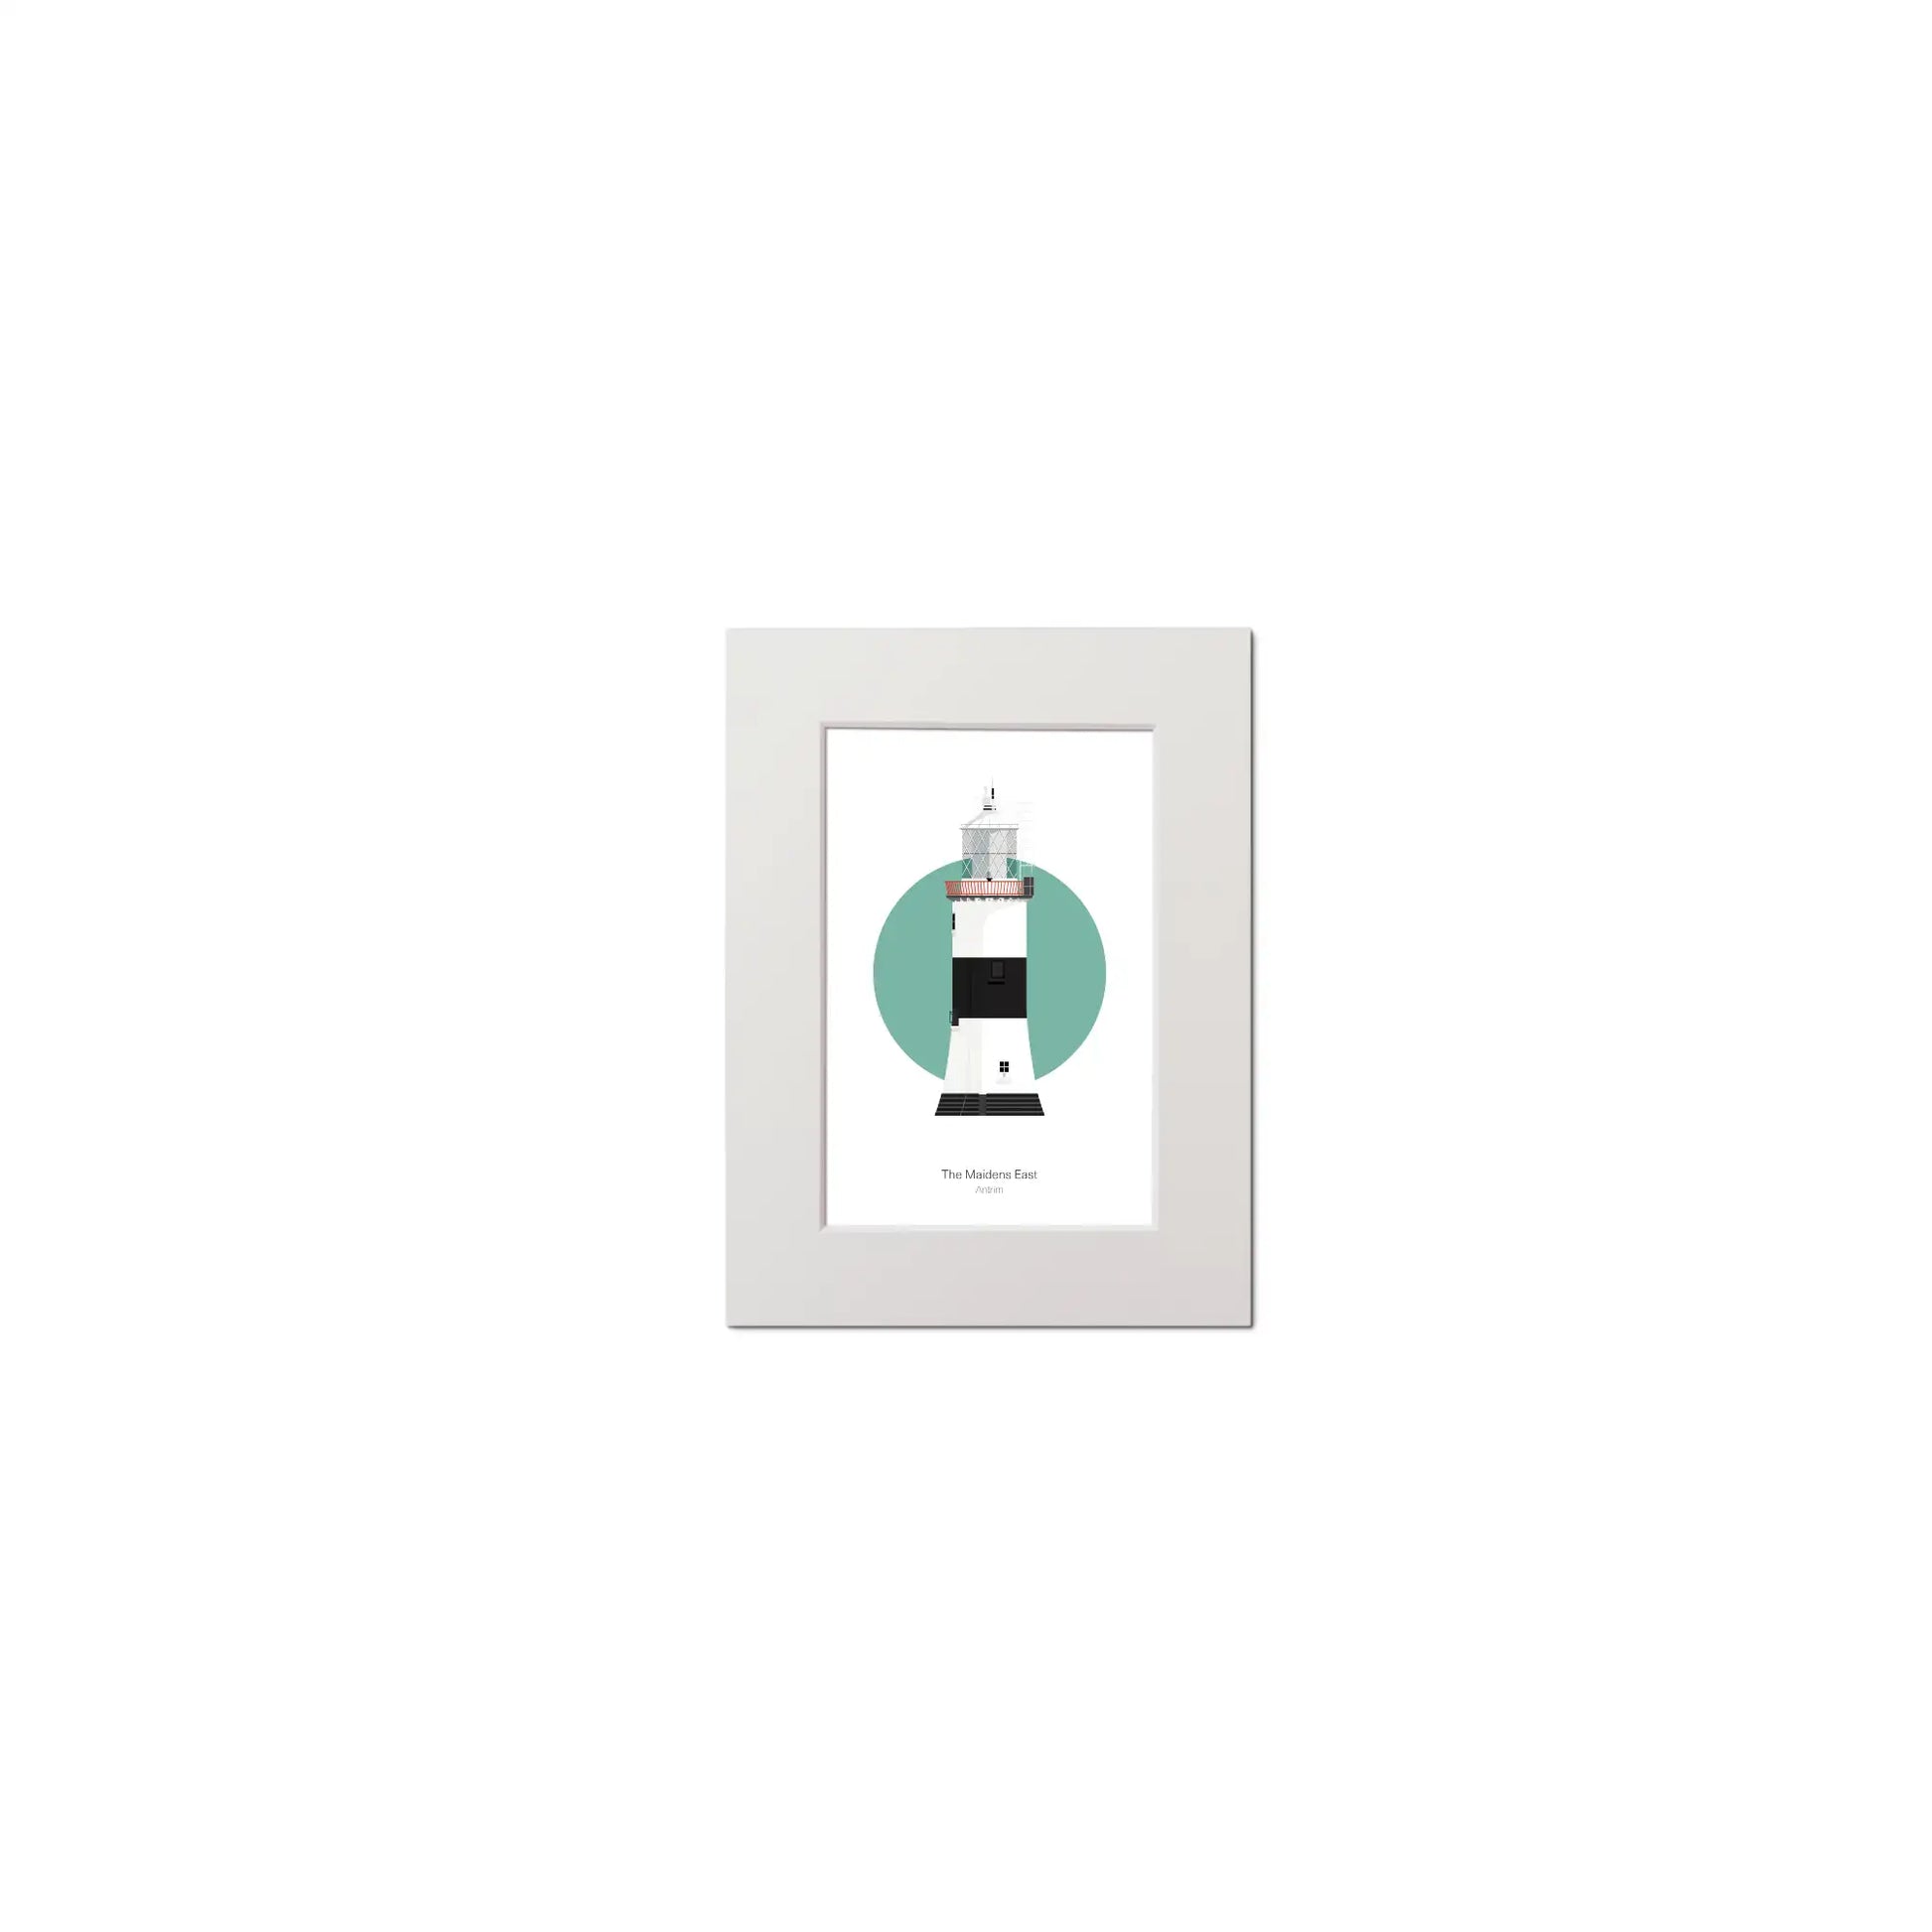 Illustration of The Maidens lighthouse on a white background inside light blue square, mounted and measuring 15x20cm.